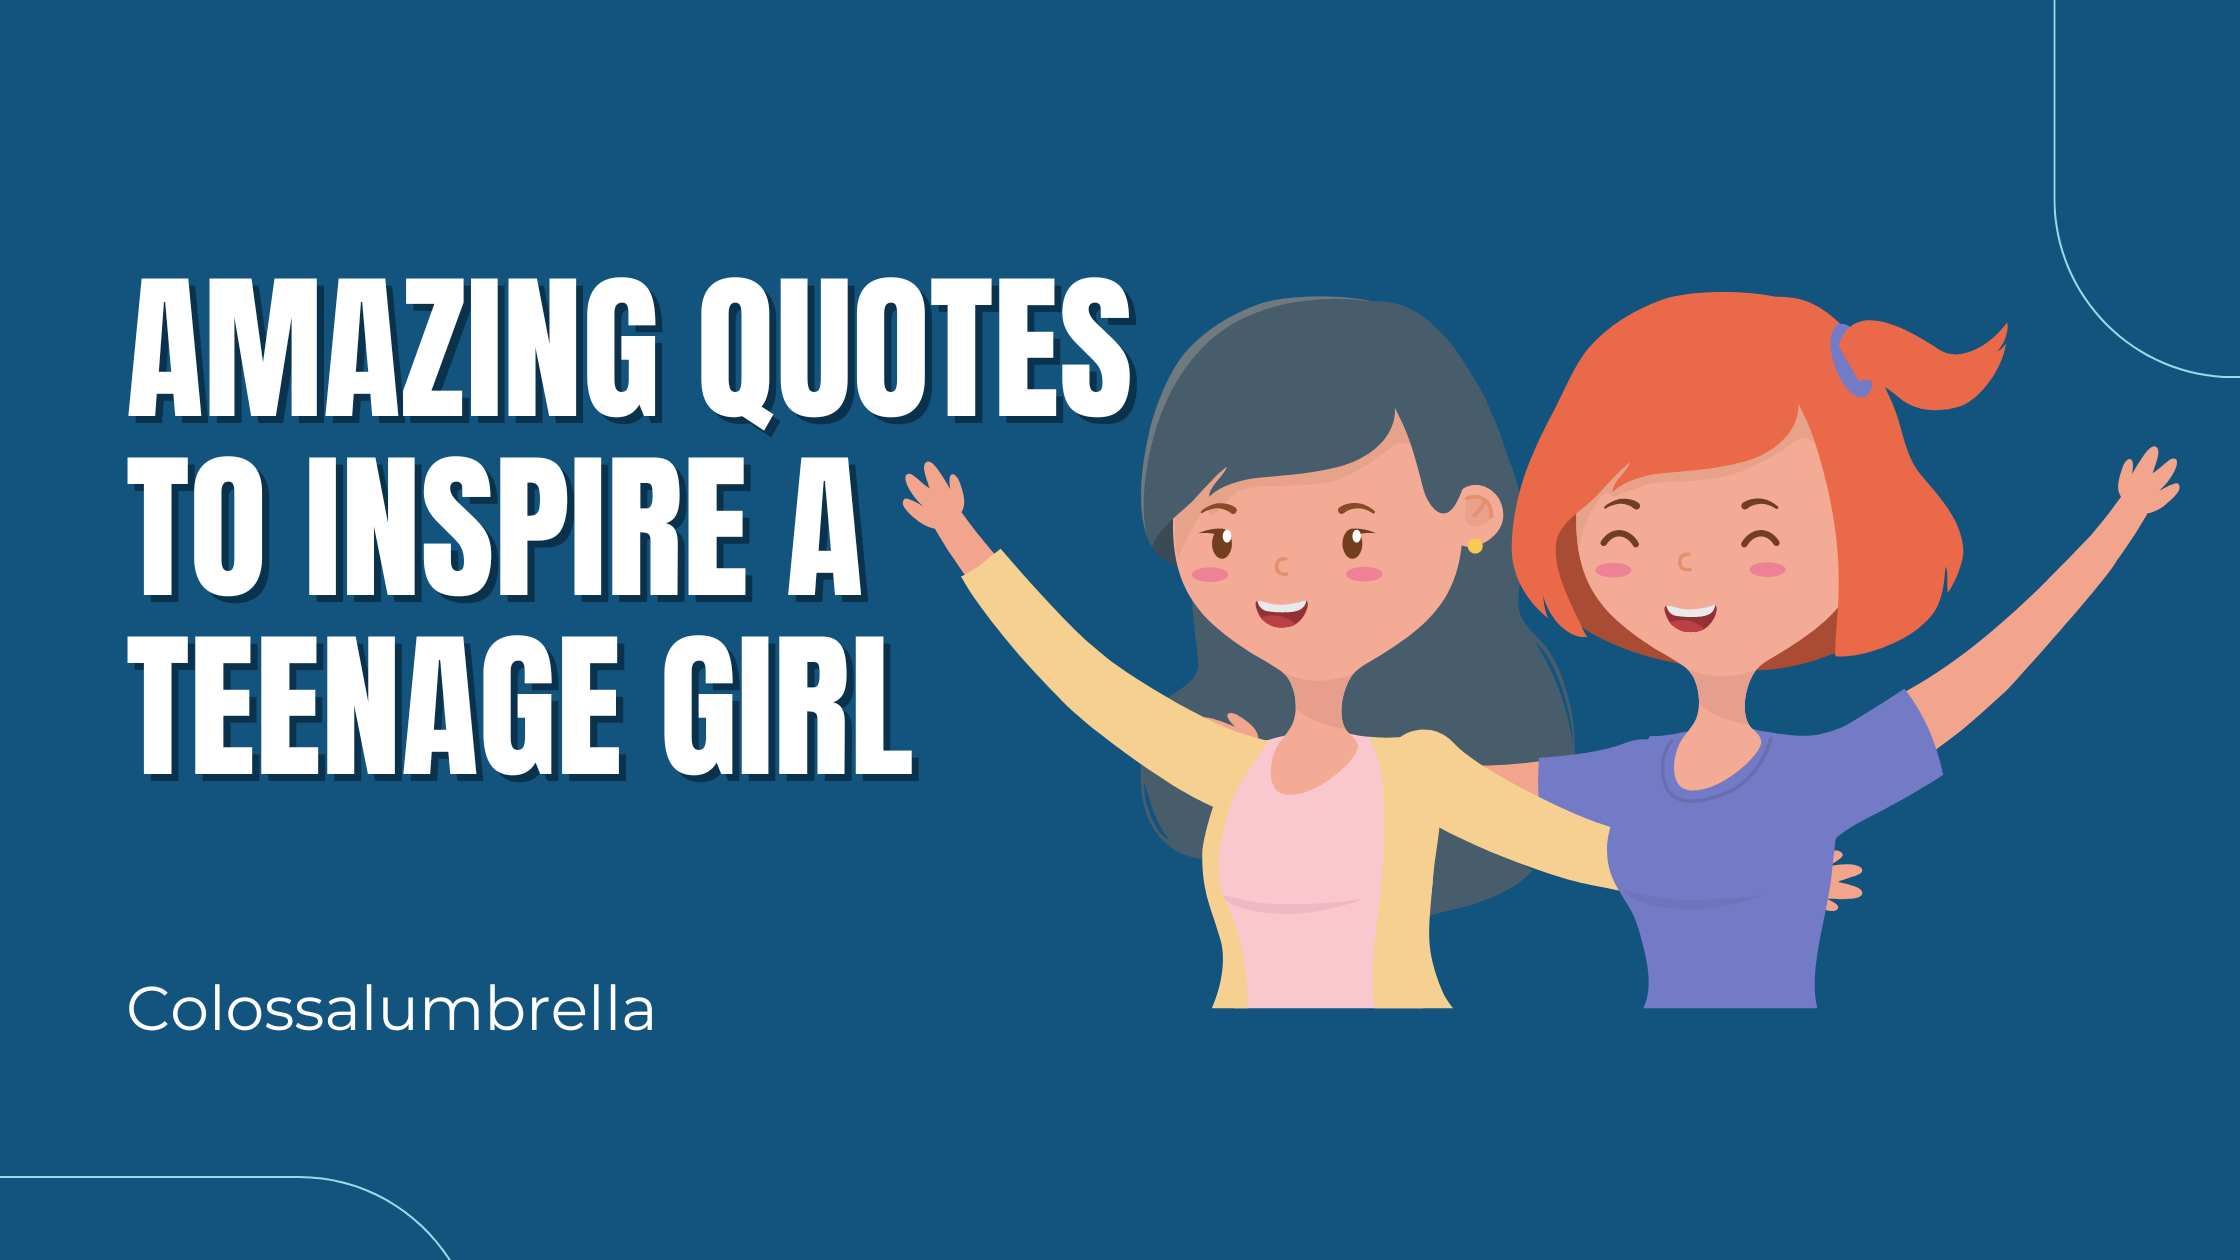 100+ Quotes to Inspire a Teenage girl by Colossalumbrella